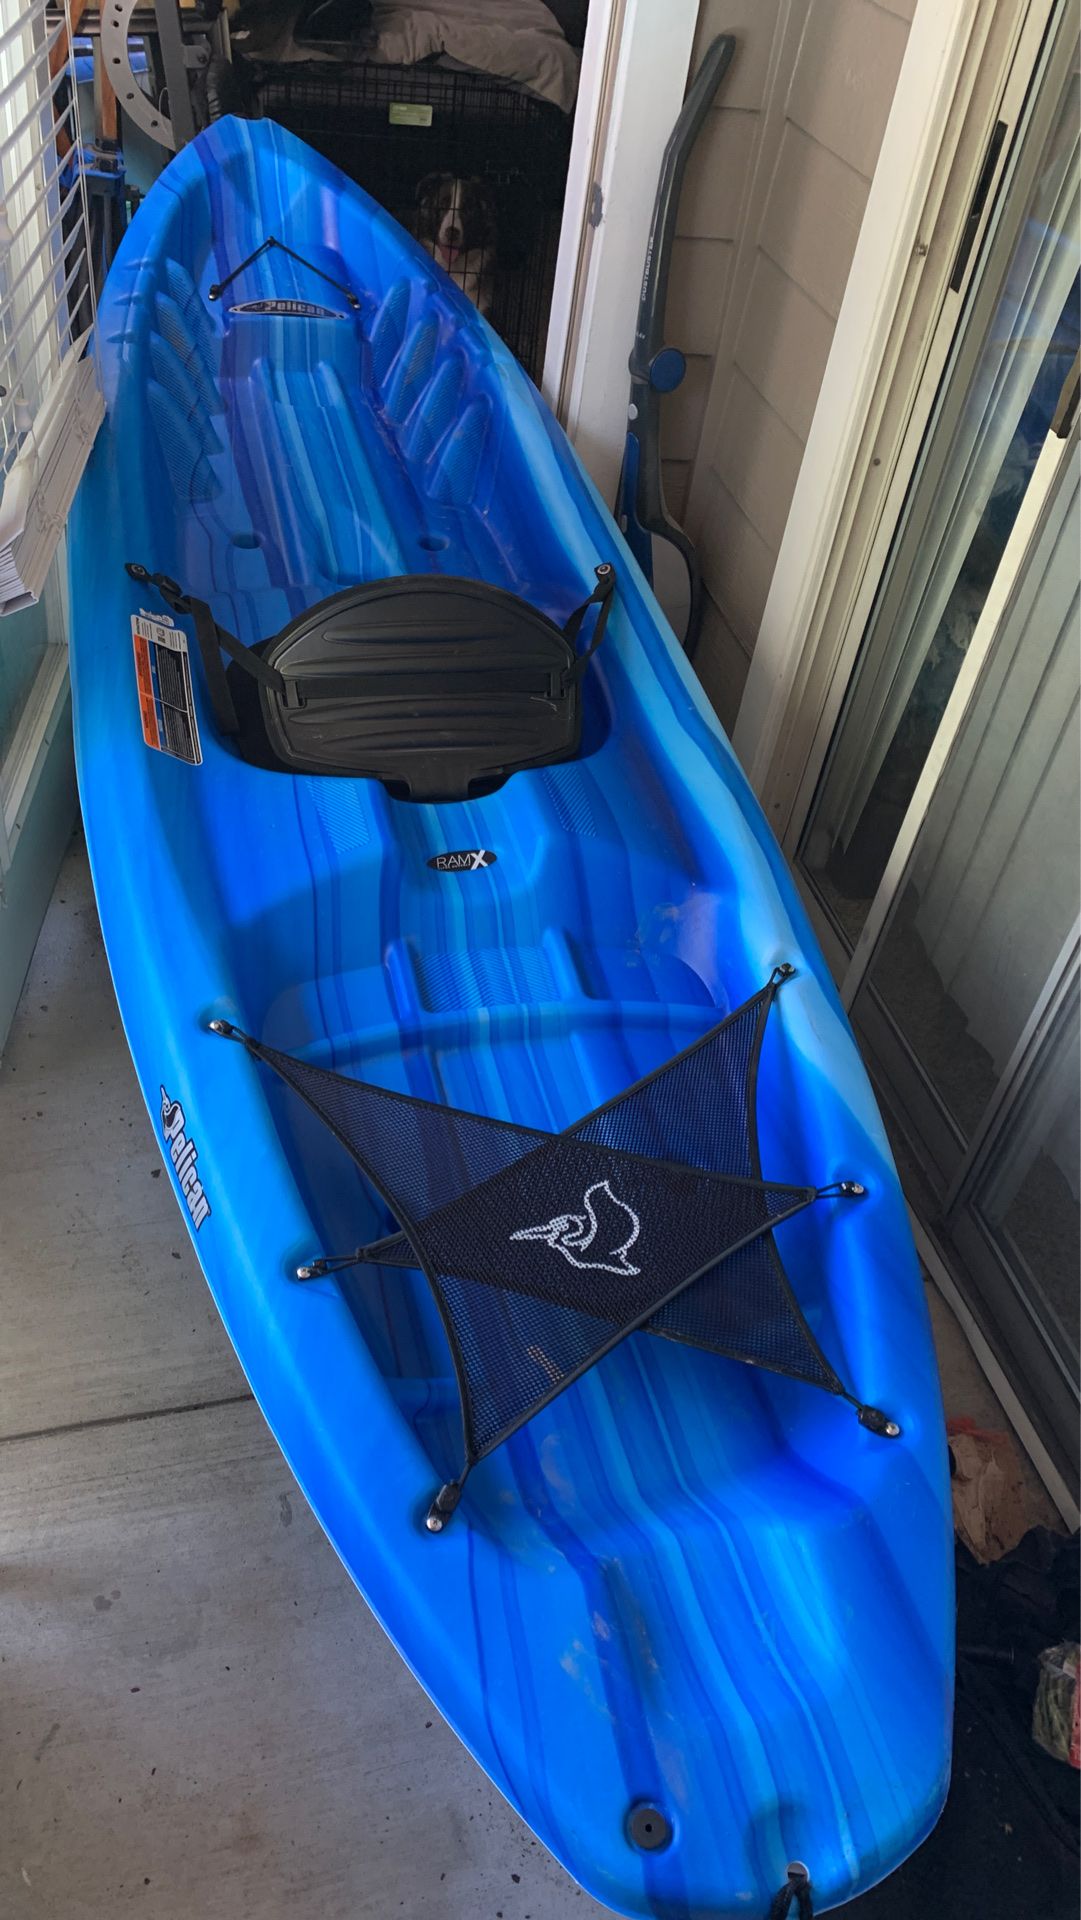 Pelican Kayak Price Reduced for quick sale!!